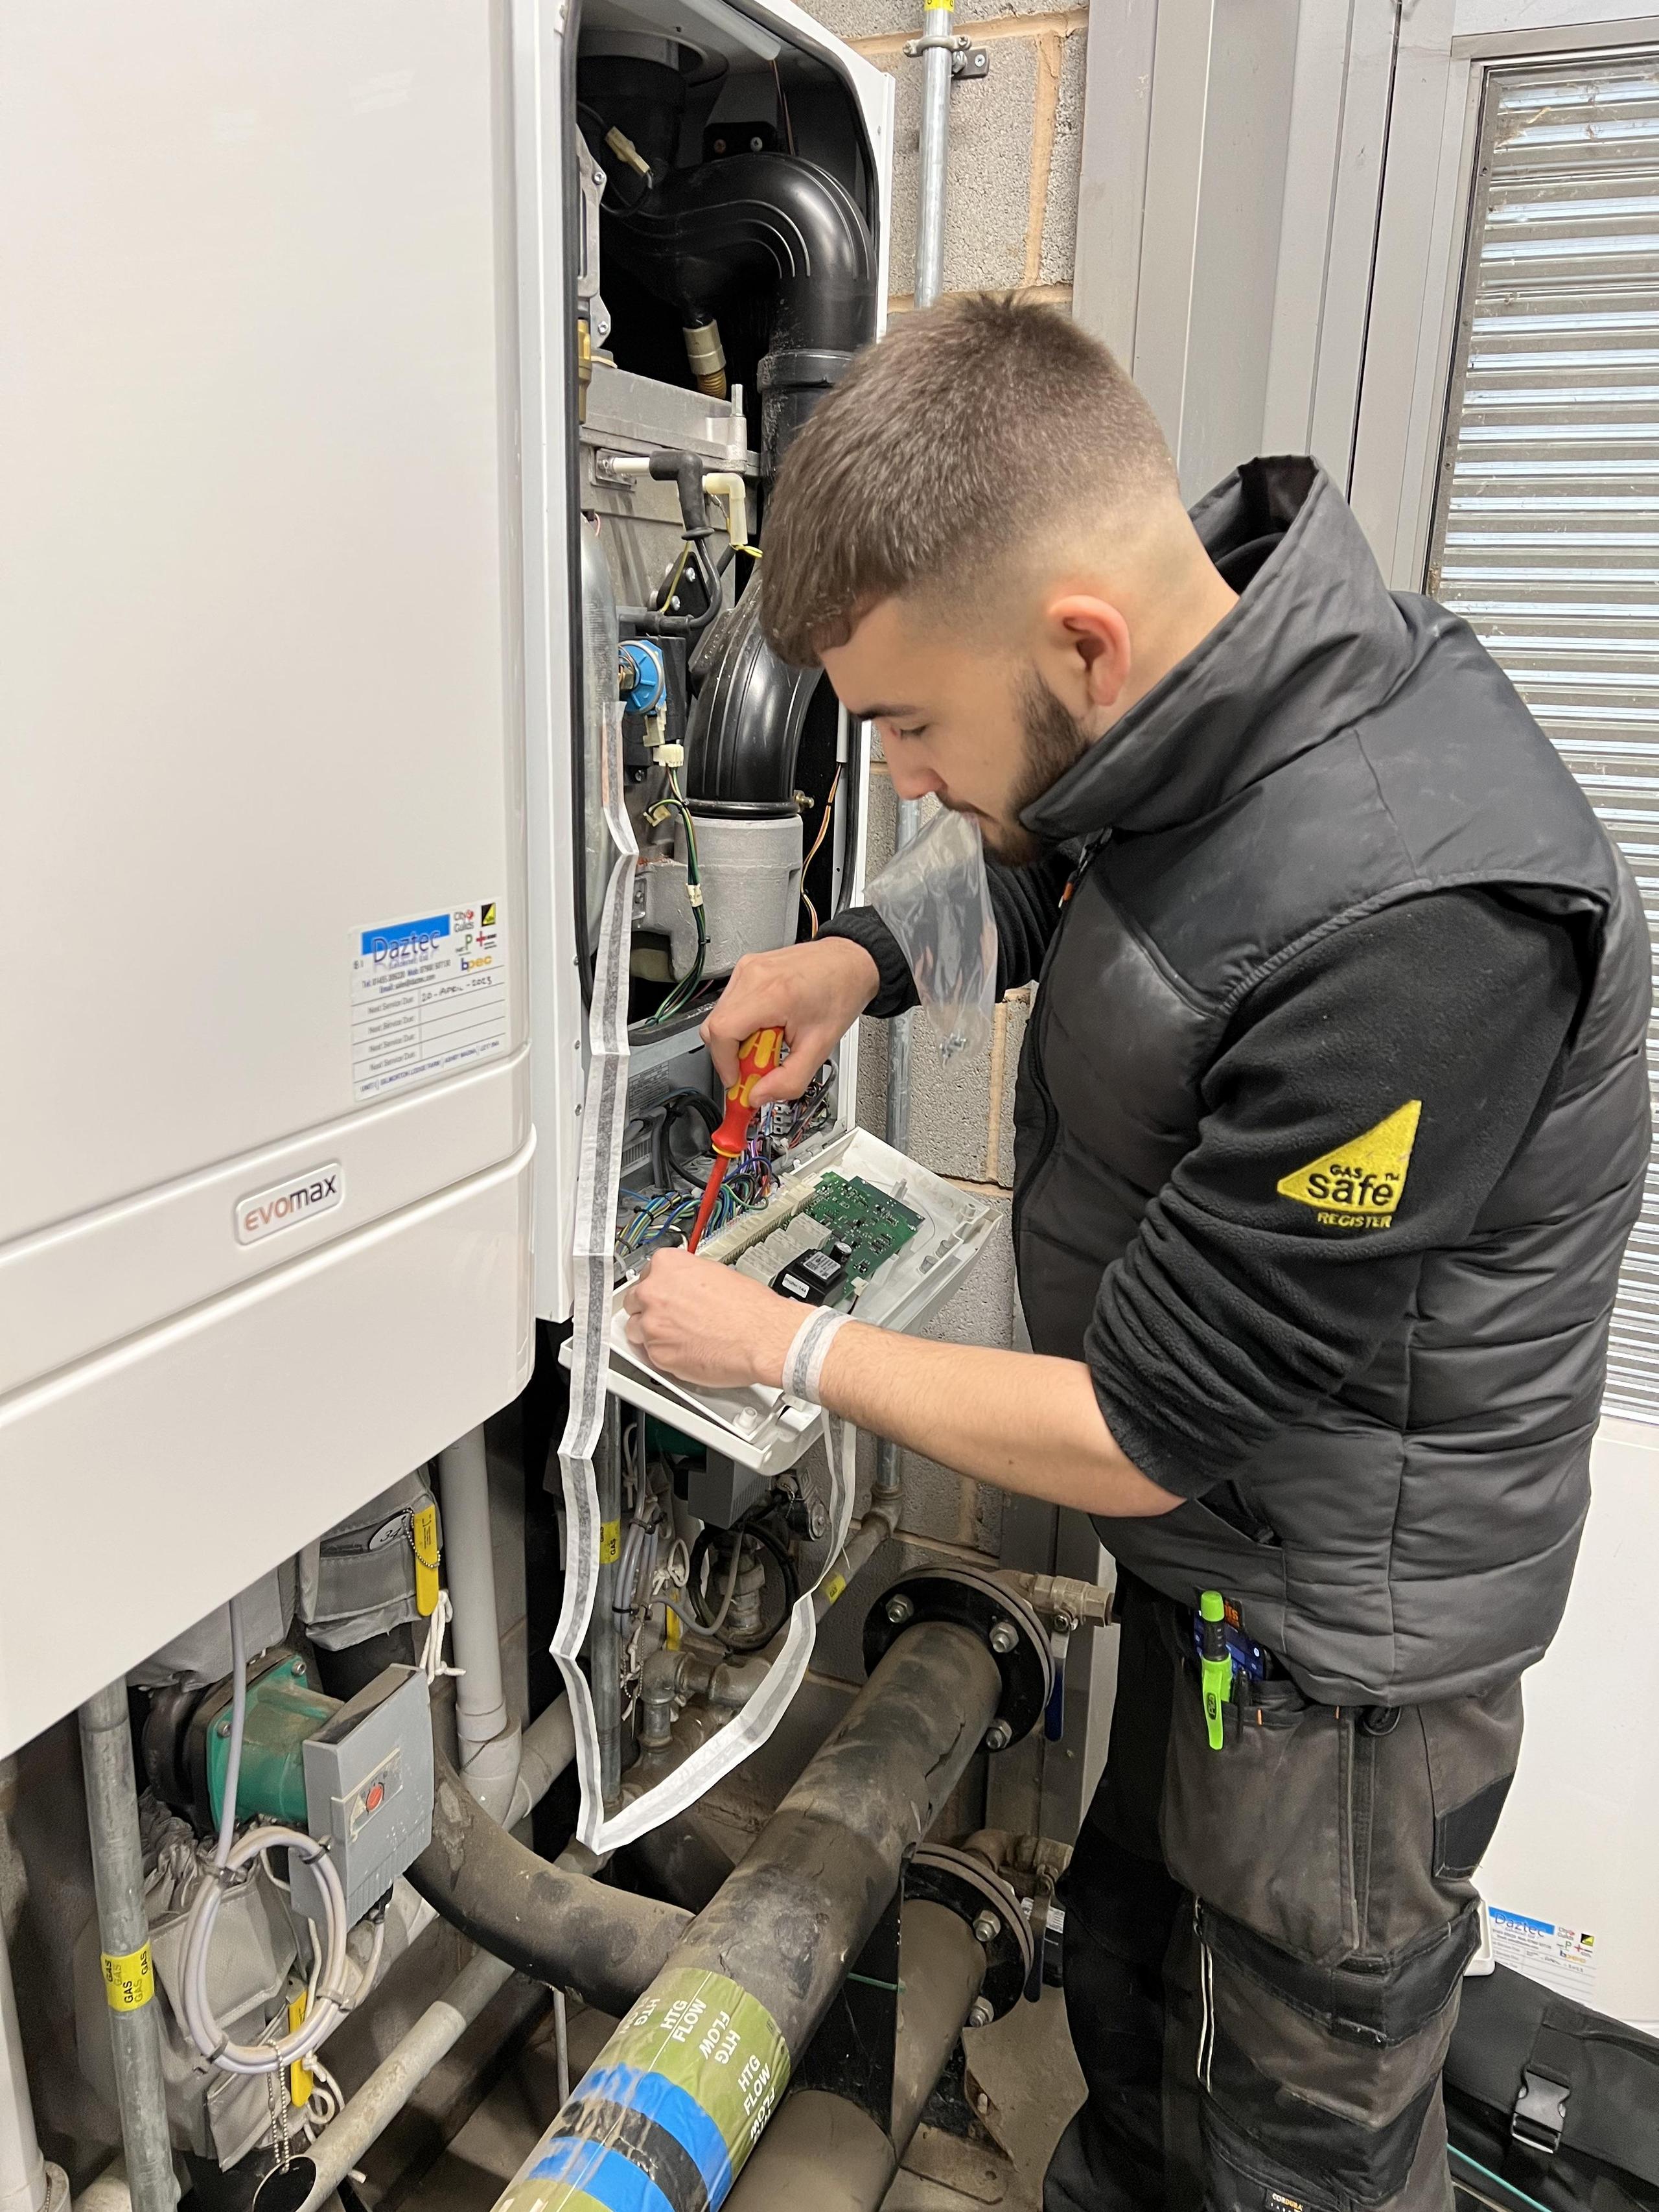 Ideal Evomax Boiler Repaired & Serviced